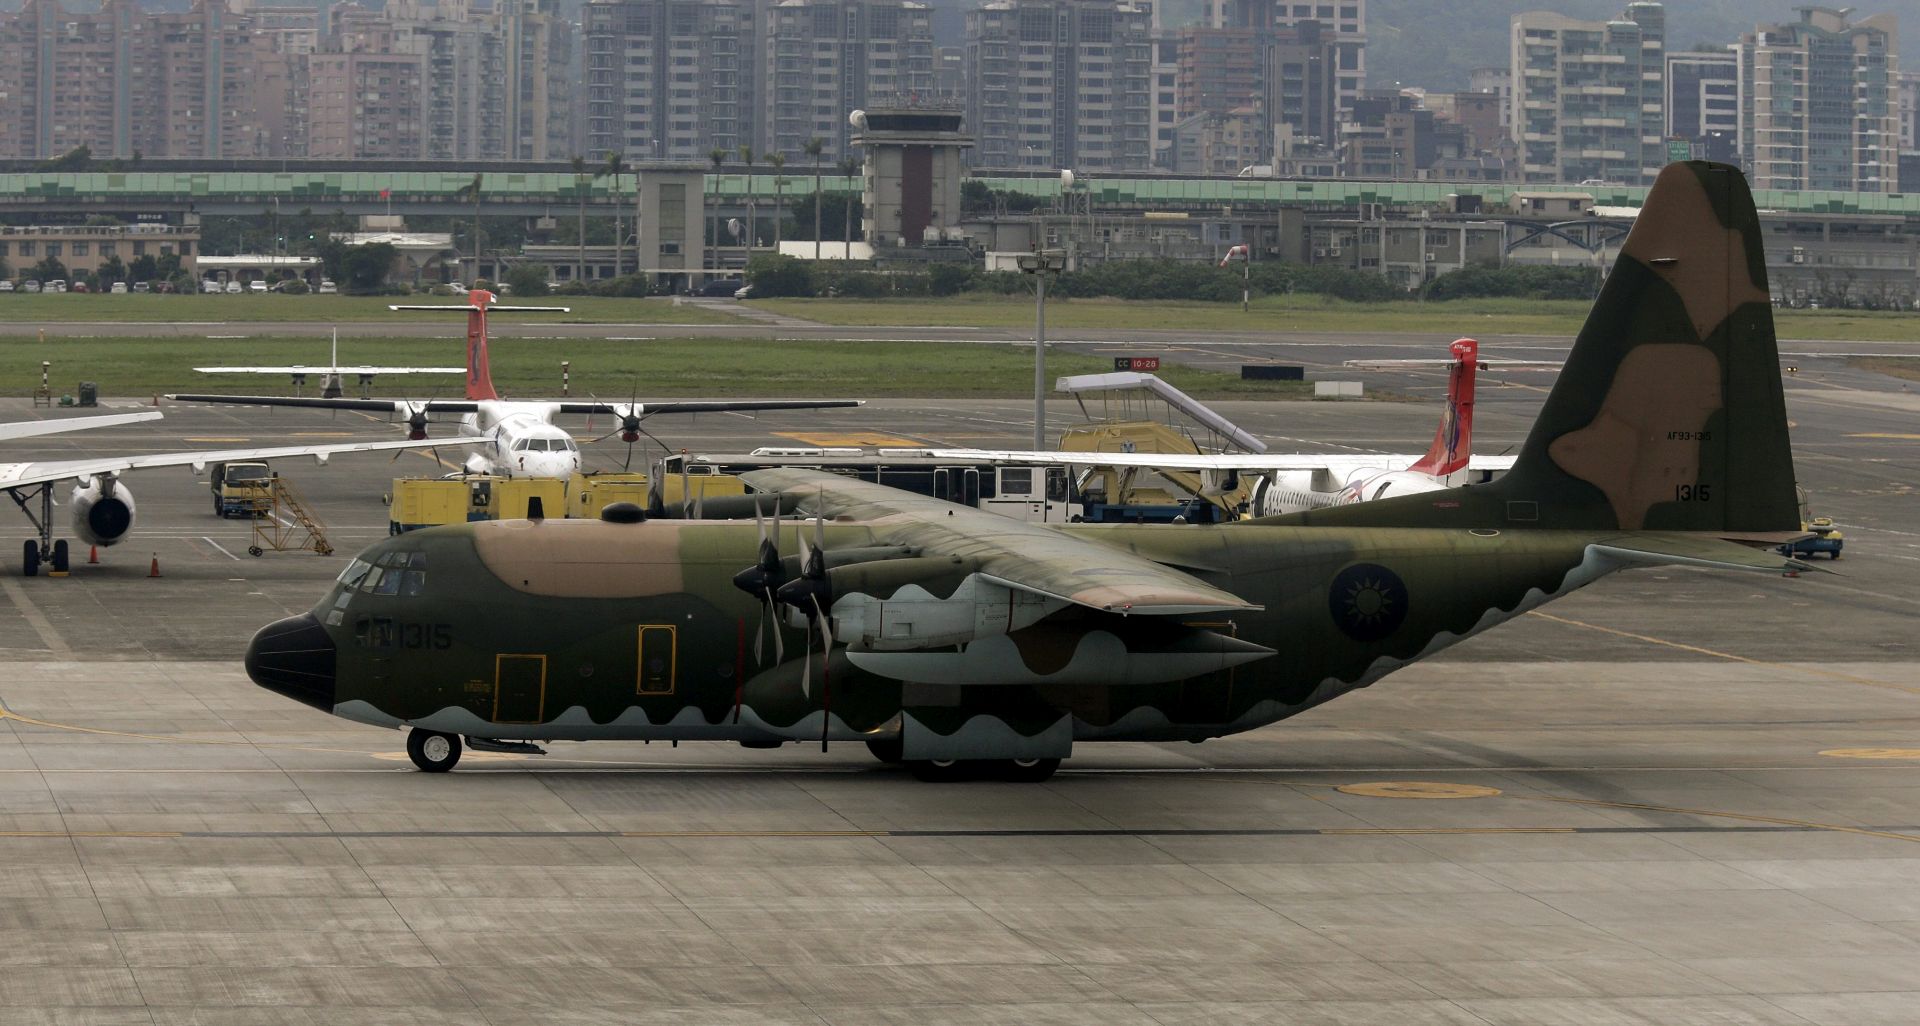 epa05071949 A C-130 military transport plane of the Taiwanese Air Force taxis at Songshan Airport after a military unloading and loading procedure in Taipei, Taiwan, 17 December 2015. Taiwan's Foreign Ministry on 17 December welcomed the US governmen approving a 1.83 billion US dollar arms sale to Taipei, the first in four years. The ministry said the arms sale shows the US has honored its commitment to Taiwan security in line with the Taiwan Relations Act.'The arms sale will not hinder development of cross-Straits ties, but instead, will help Taiwan maintain cross-Straits peace and stability, and give Taiwan more confidence in dialogue with mainland China,' the statement said. Shortly before Washington's announcement, China warned the US against the arms sale, saying that 'Beijing is firmly opposed to any country - in any form or under any excuse - exporting weapons, weapon equipment or technology to Taiwan. This position is consistent, clear and firm.'  EPA/RITCHIE B. TONGO